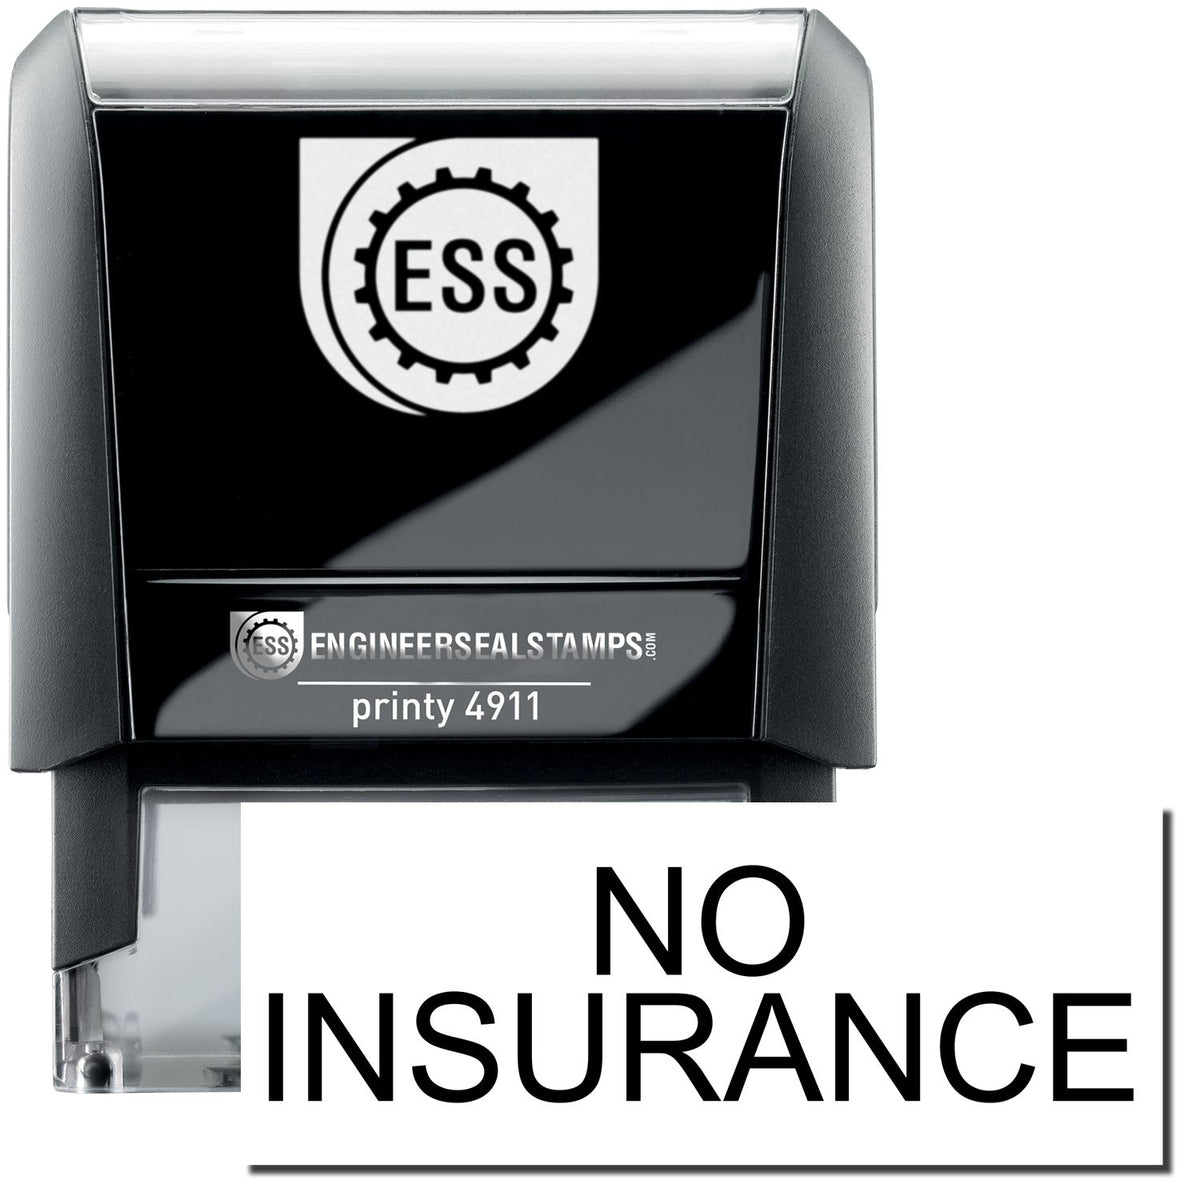 A self-inking stamp with a stamped image showing how the text &quot;NO INSURANCE&quot; is displayed after stamping.